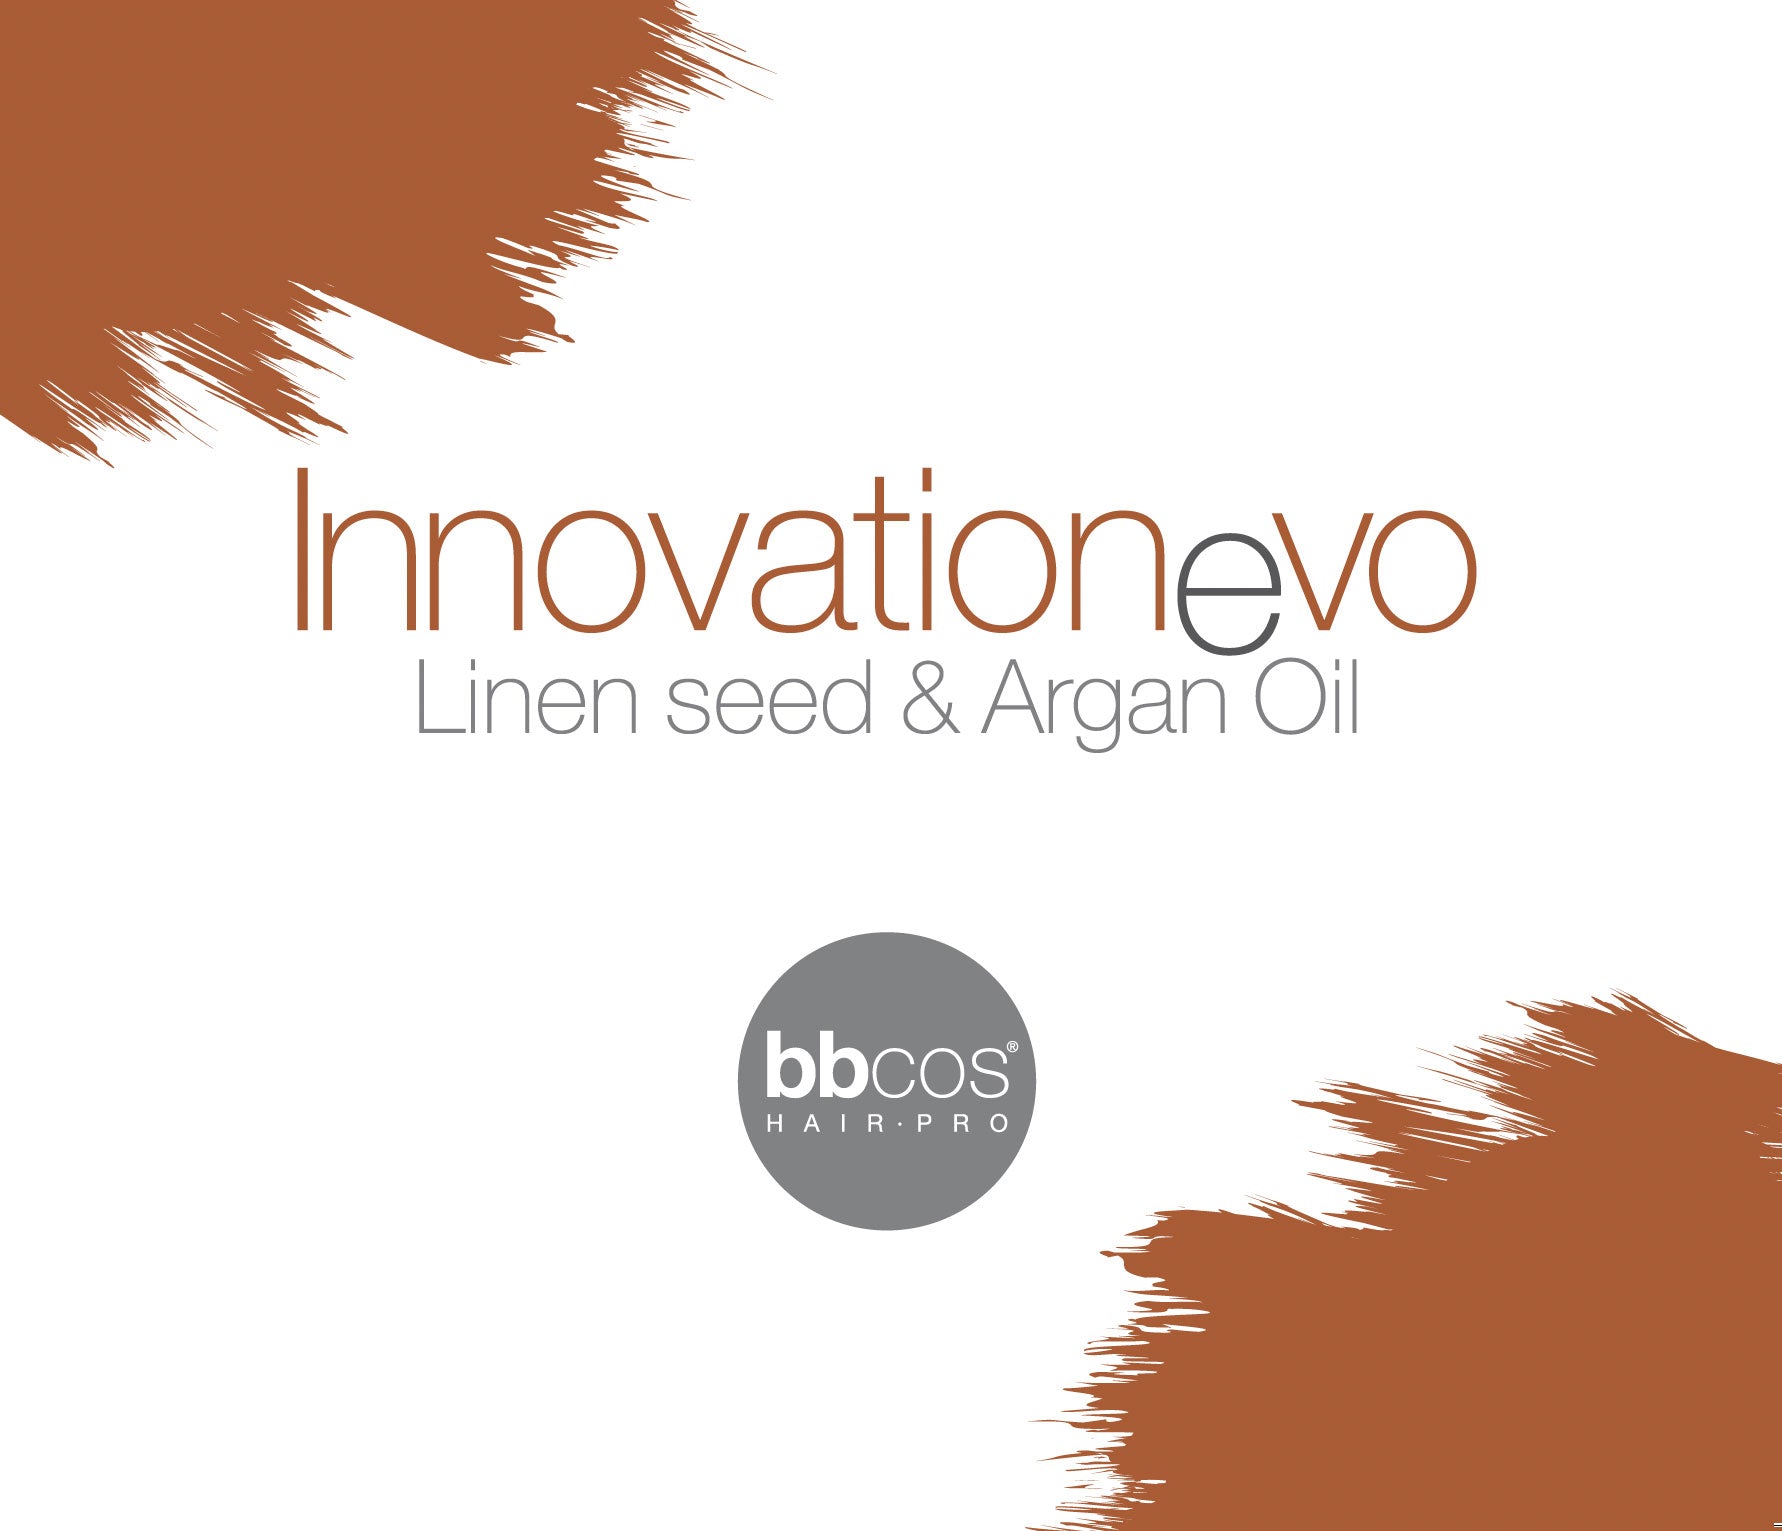 Bbcos Innovation Hair Color 100ml 5/07 (Light Brown Tobacco)